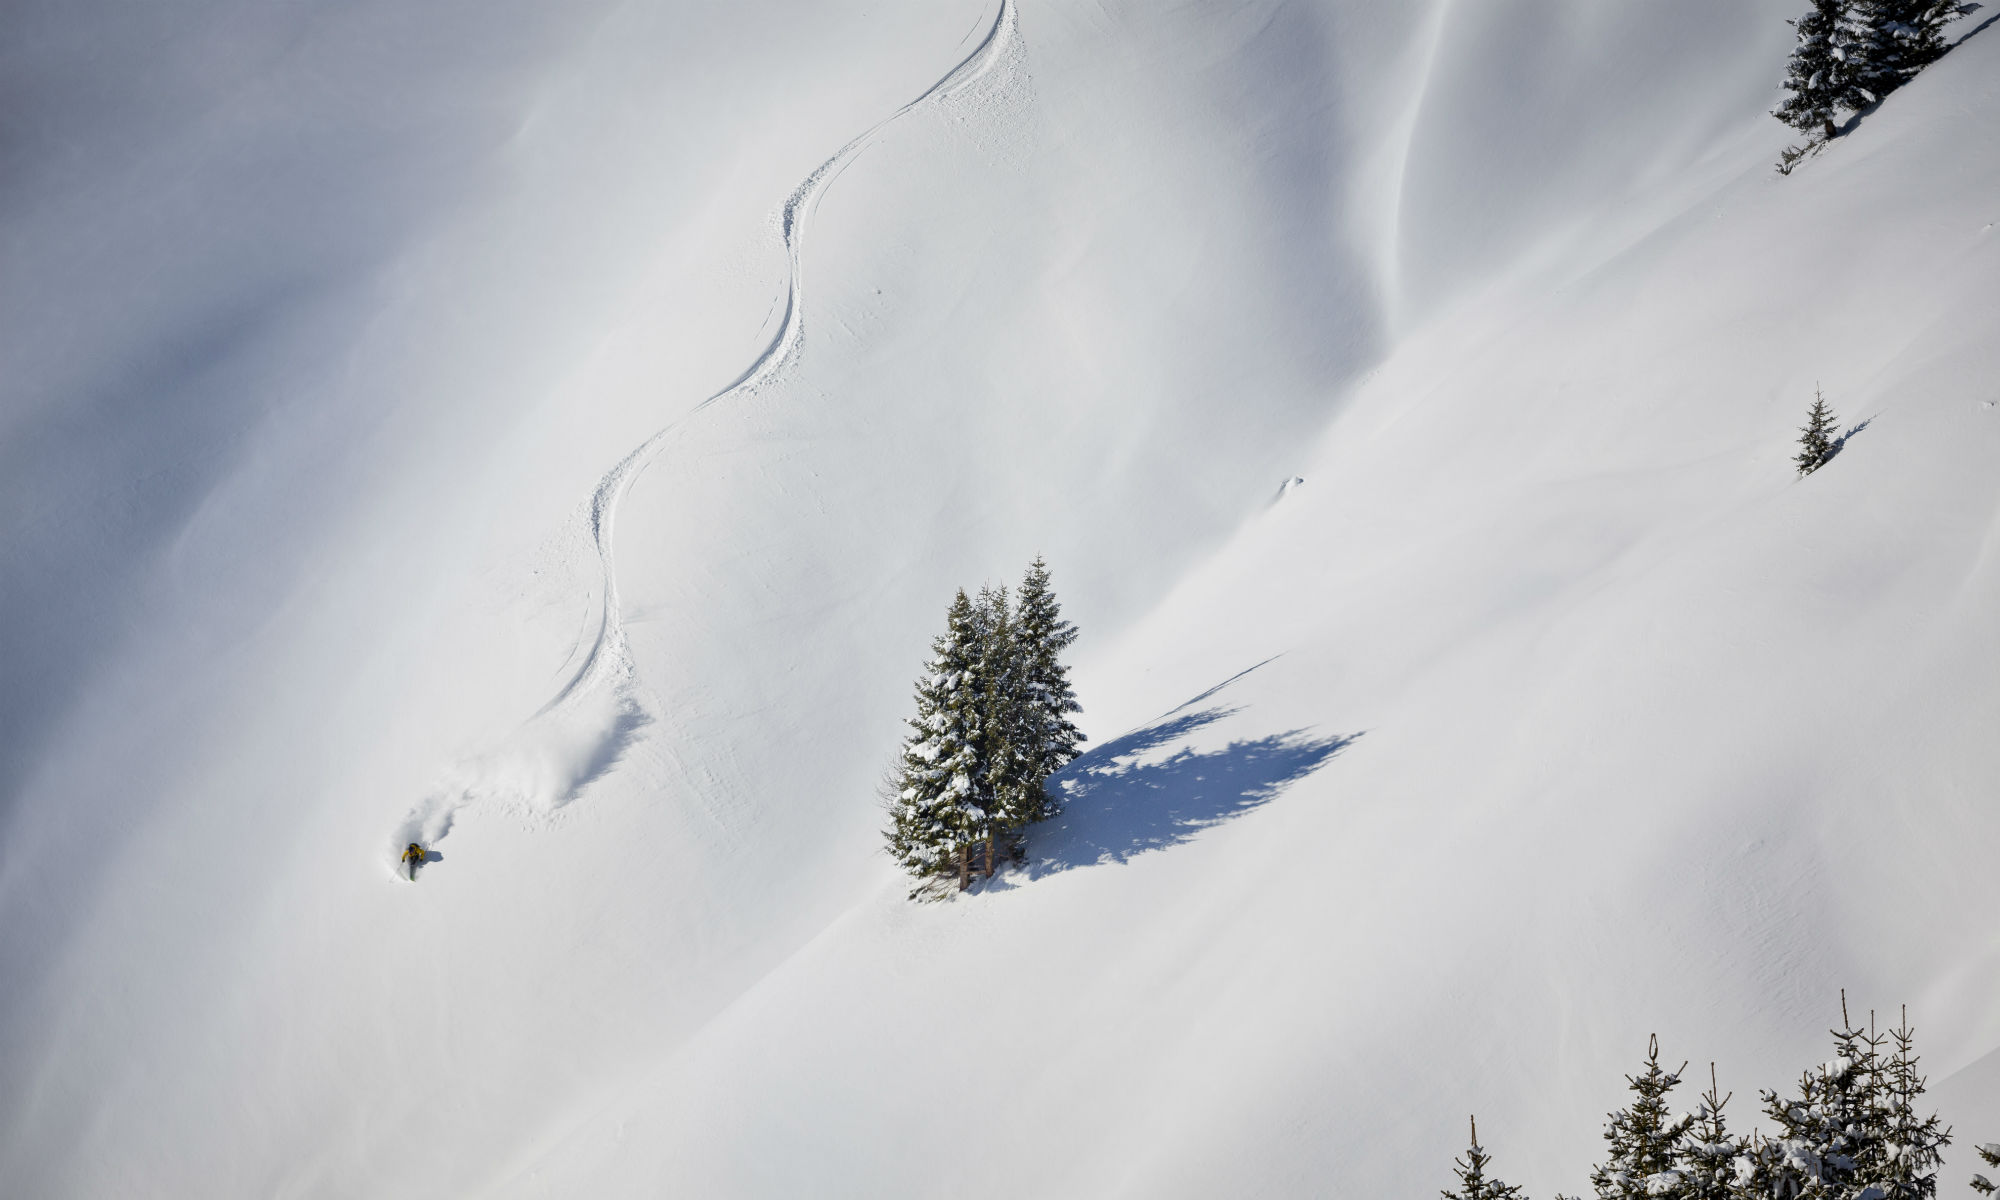 A freeride skier drawing turns into powder snow in Fieberbrunn.